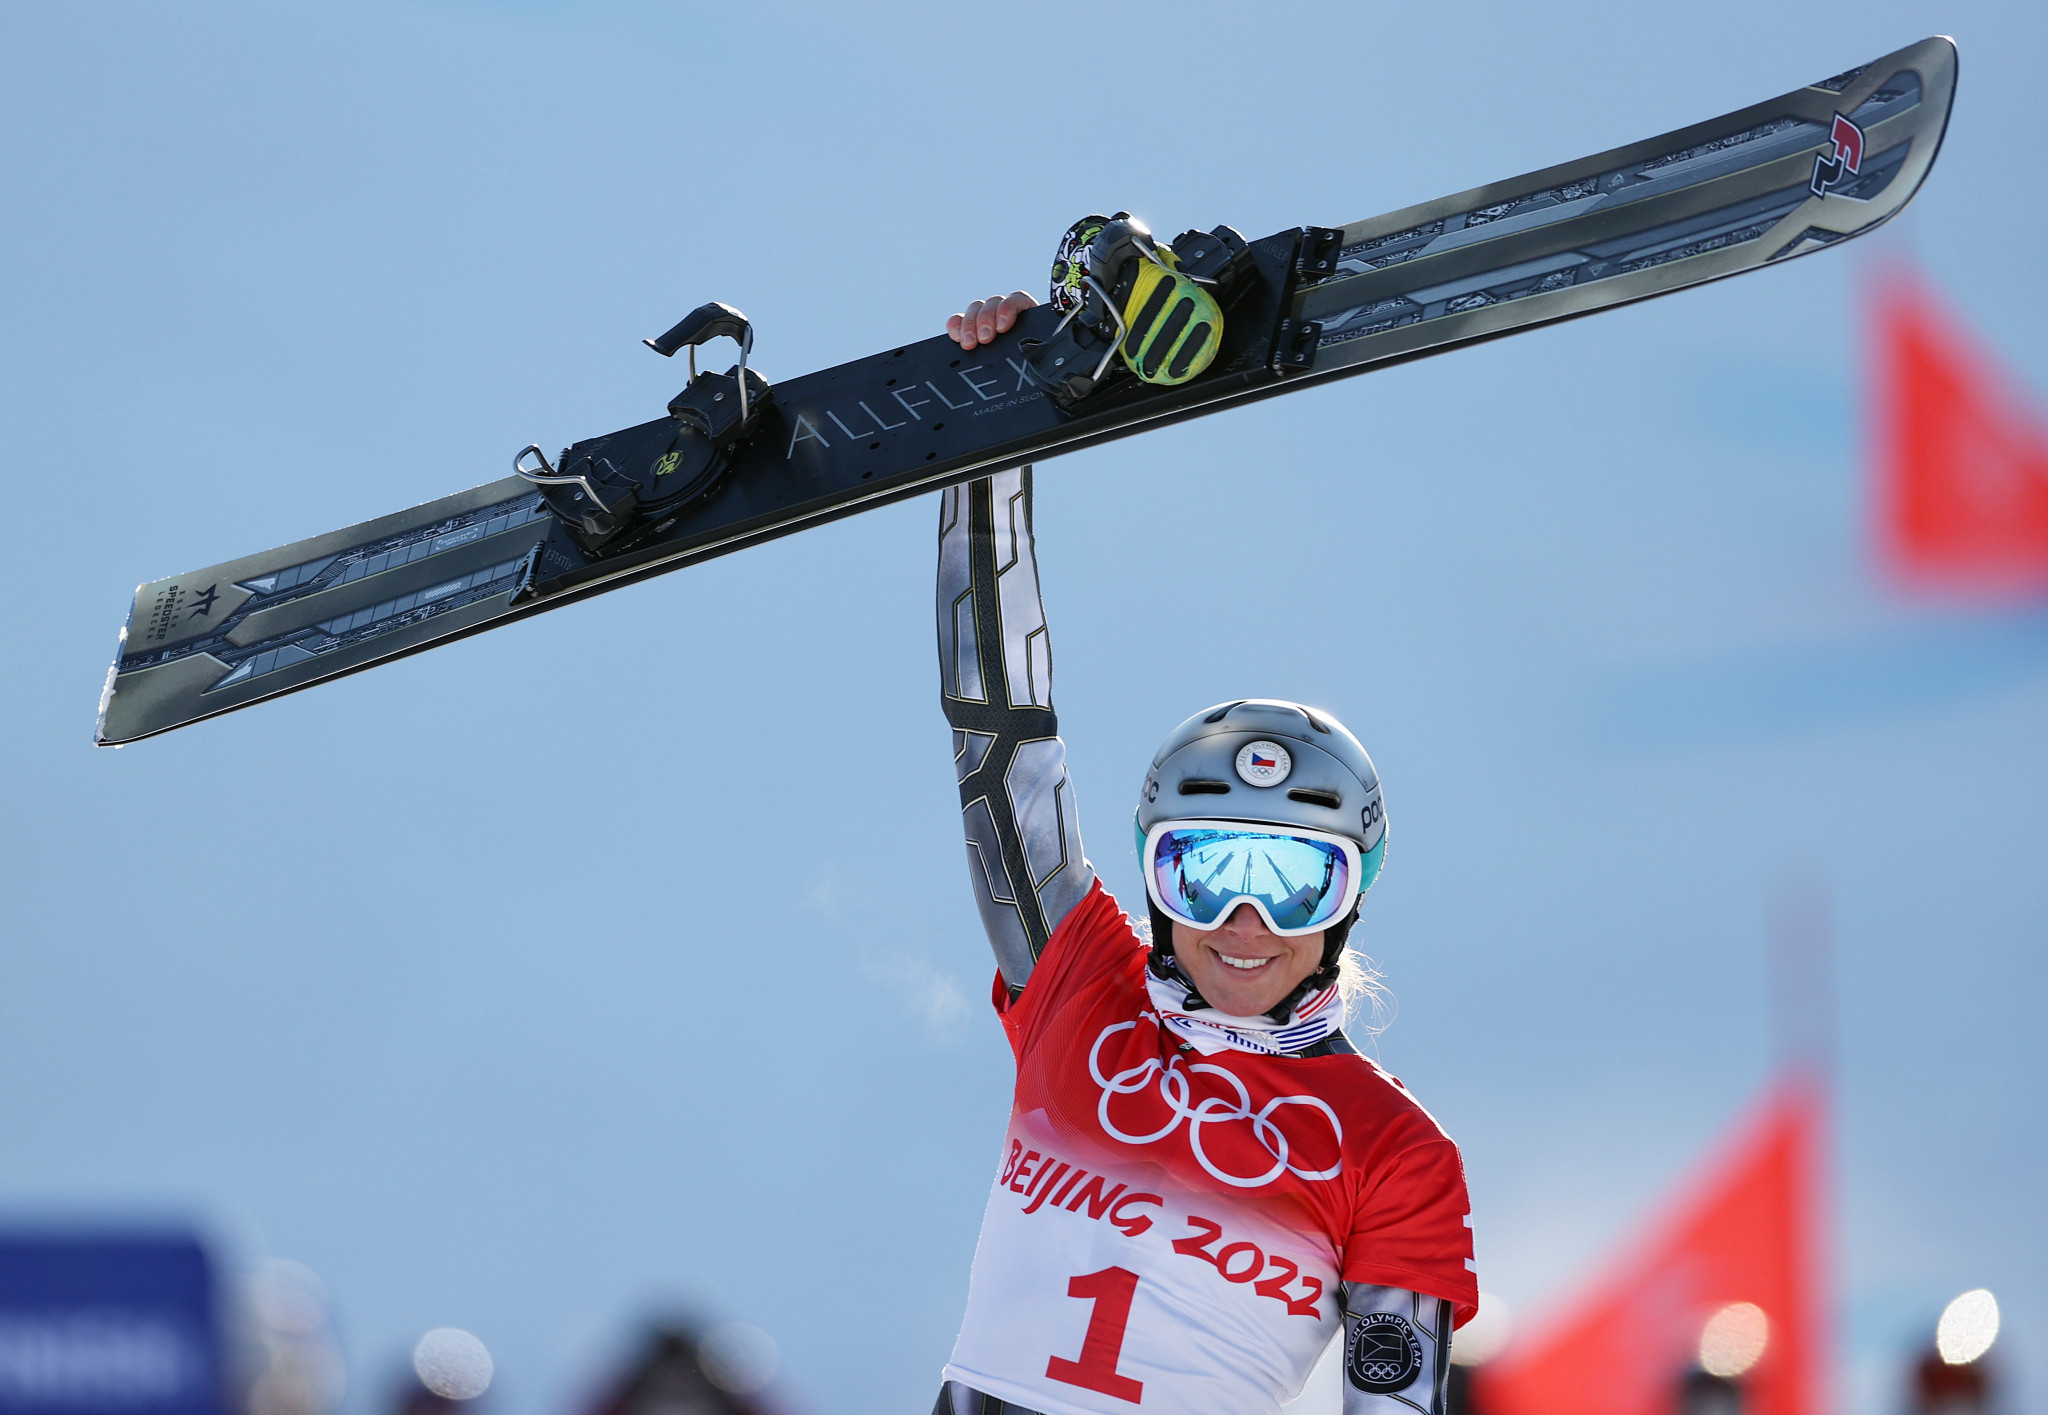 Ester Ledecká won Alpine snowboard gold and will next set her sights on the women's ski super-G, attempting to complete a unique double-double after the Czech won both gold medals at Pyeongchang 2018 ©Getty Images